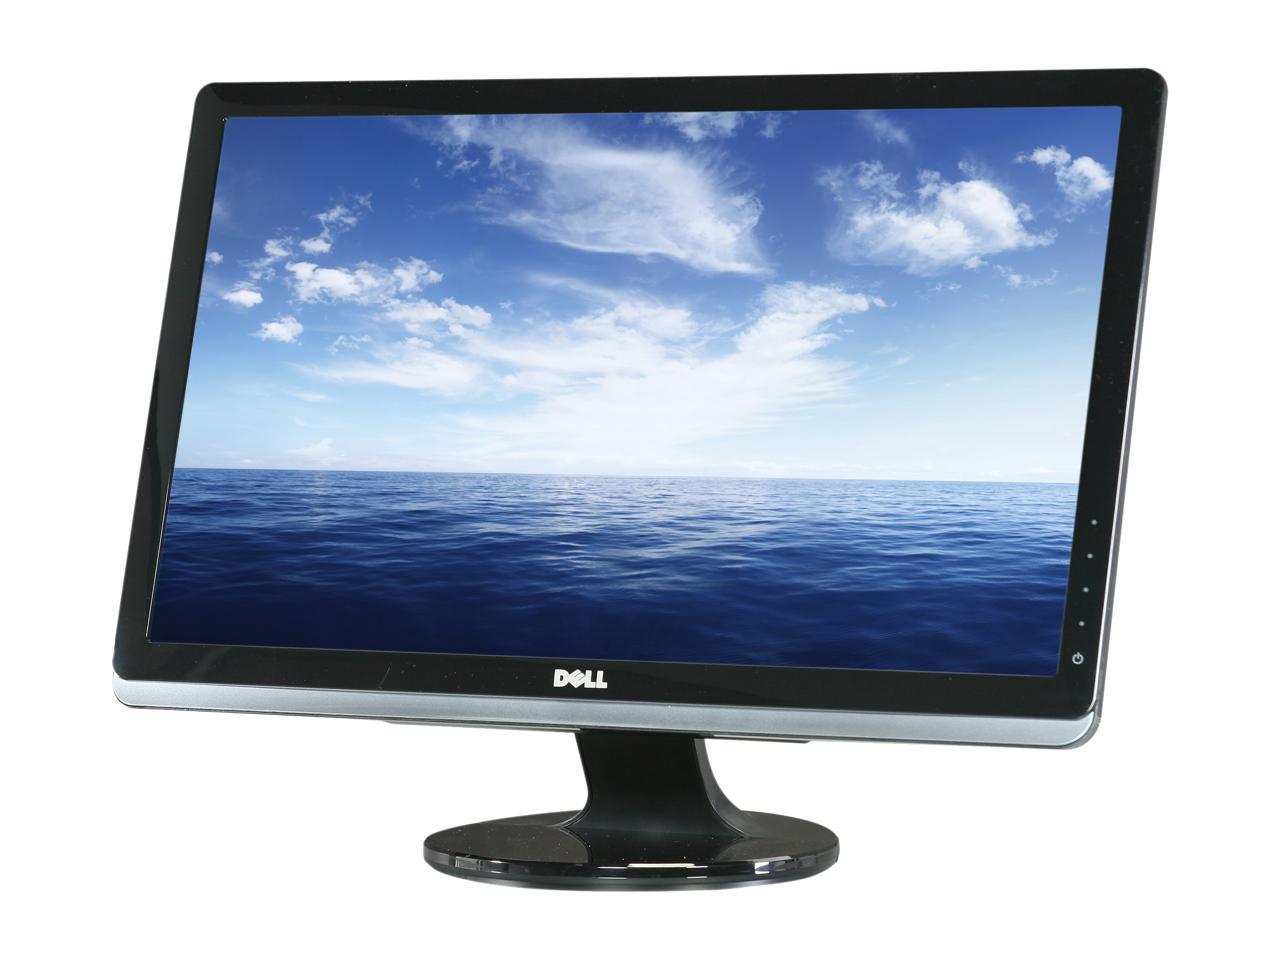 Dell ST2220L Glossy Black 21.5" 5ms HDMI LED Backlight Widescreen LCD  Monitor DC 8000000:1 (1000:1)